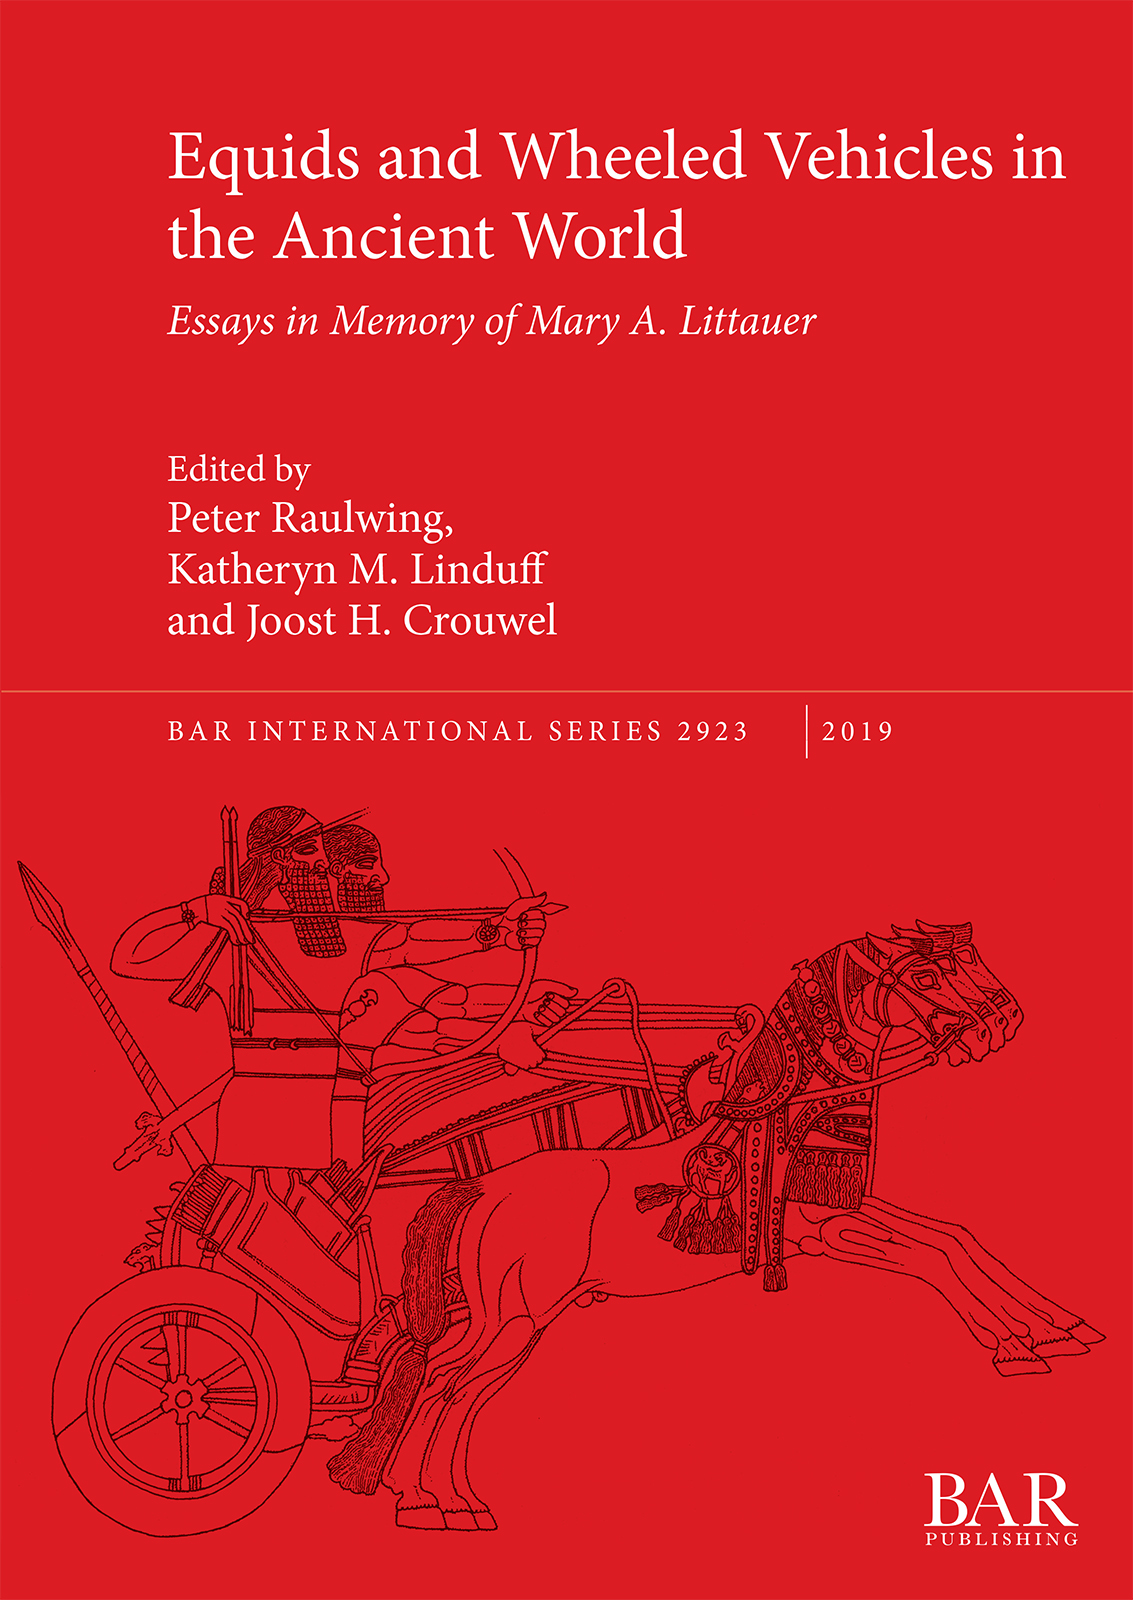 Equids and wheeled vehicles in the Ancient World